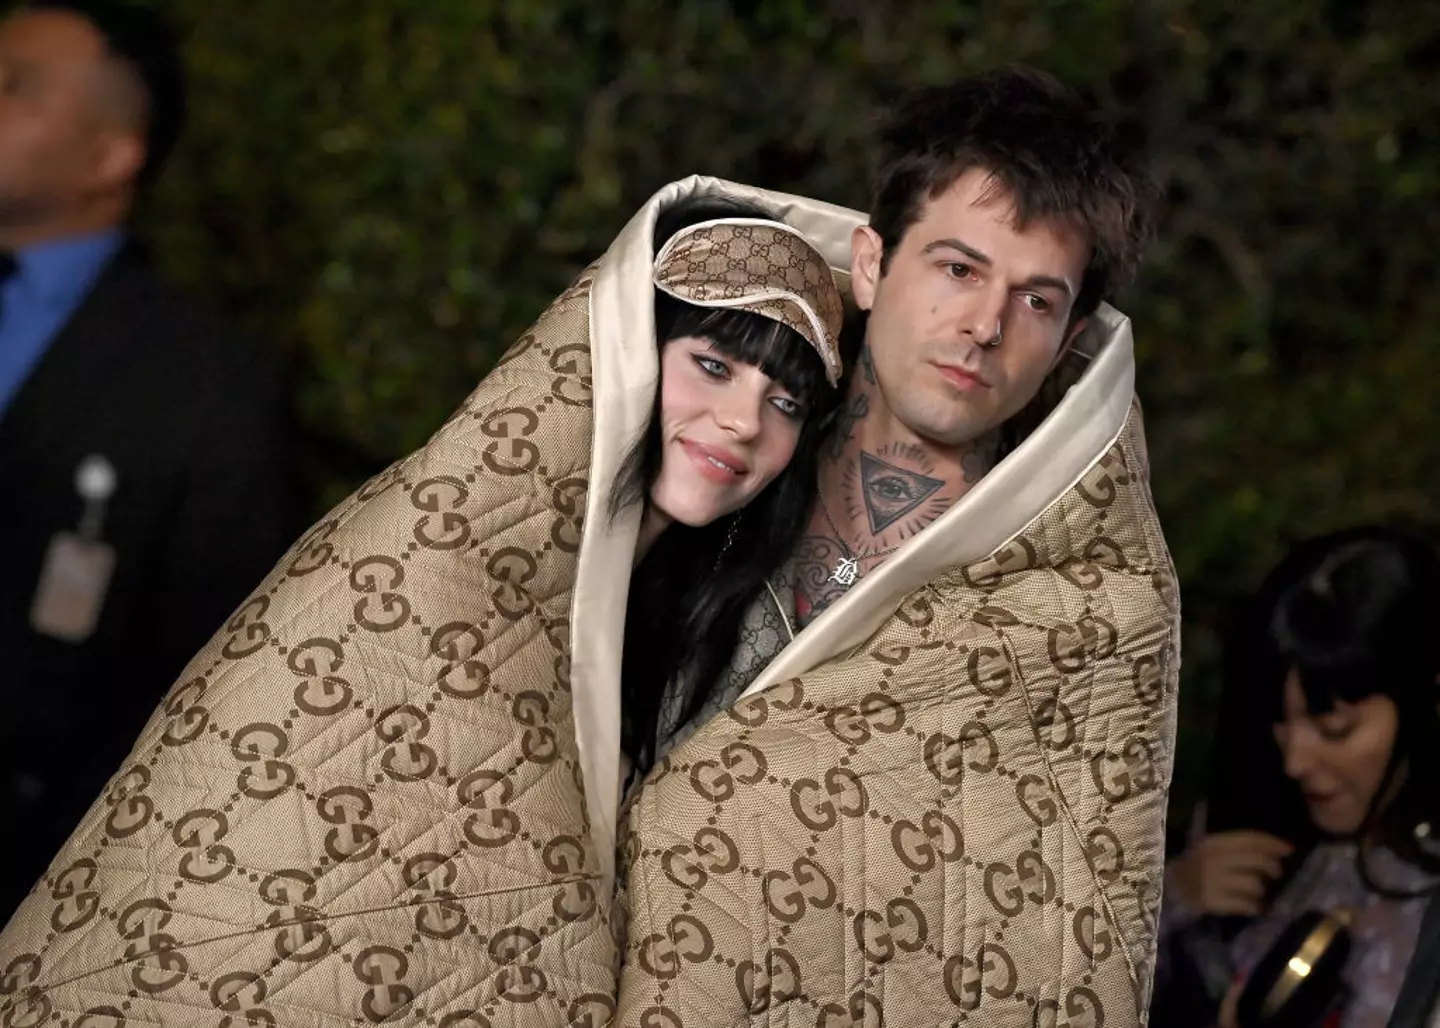 Although they have since split, Billie Eilish and Jesse Rutherford attracted scrutiny for their age-gap. (Axelle/Bauer-Griffin/FilmMagic)